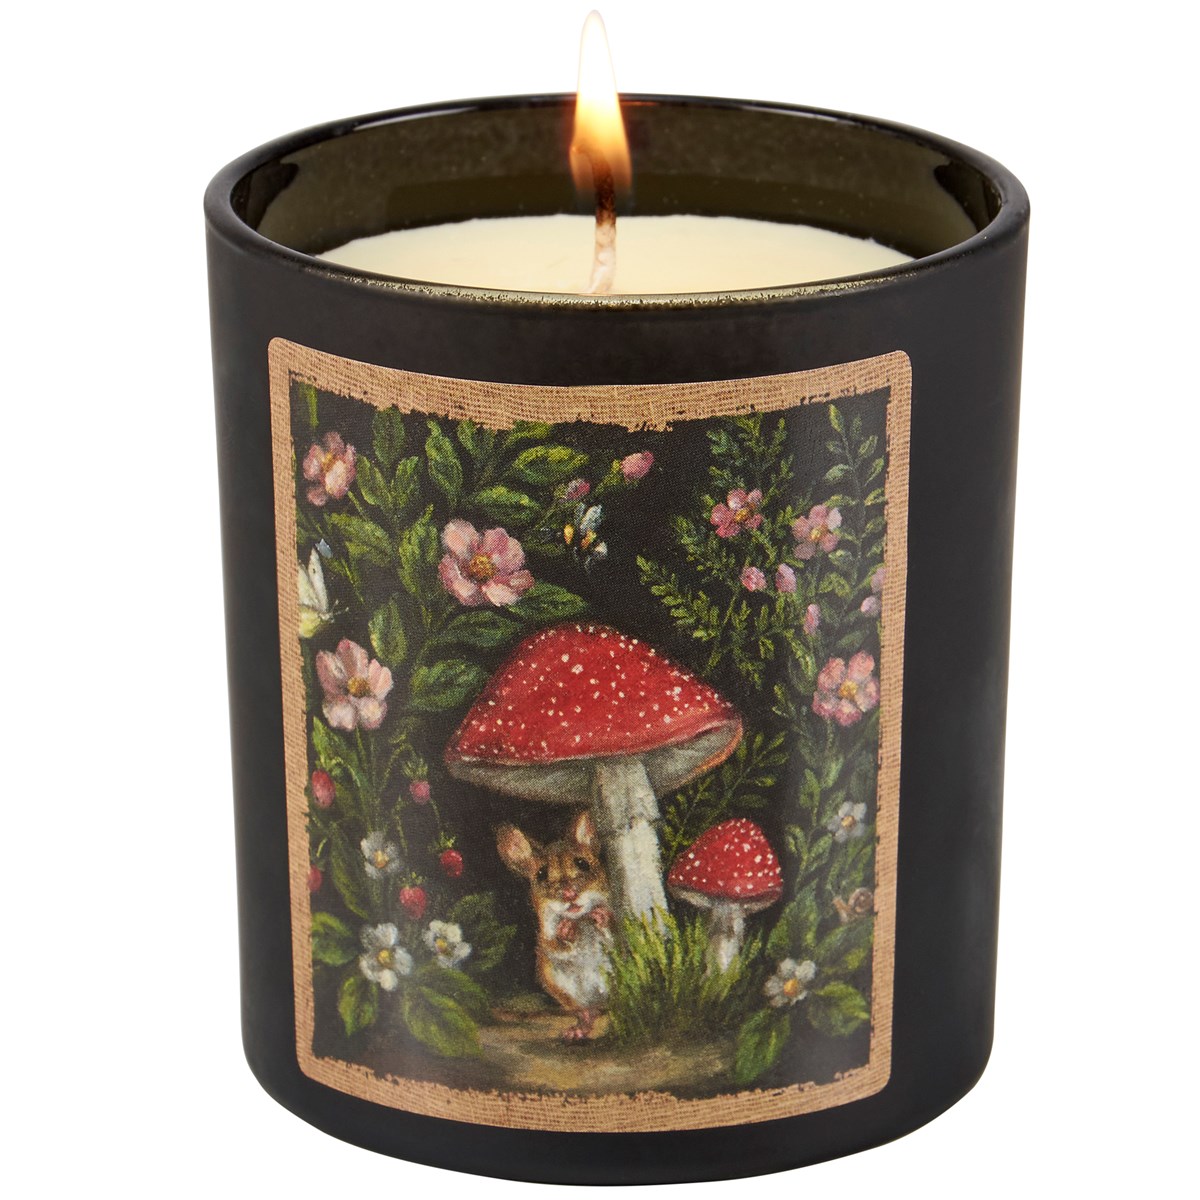 Woodland Mouse Jar Candle - Soy Wax, Glass, Cotton